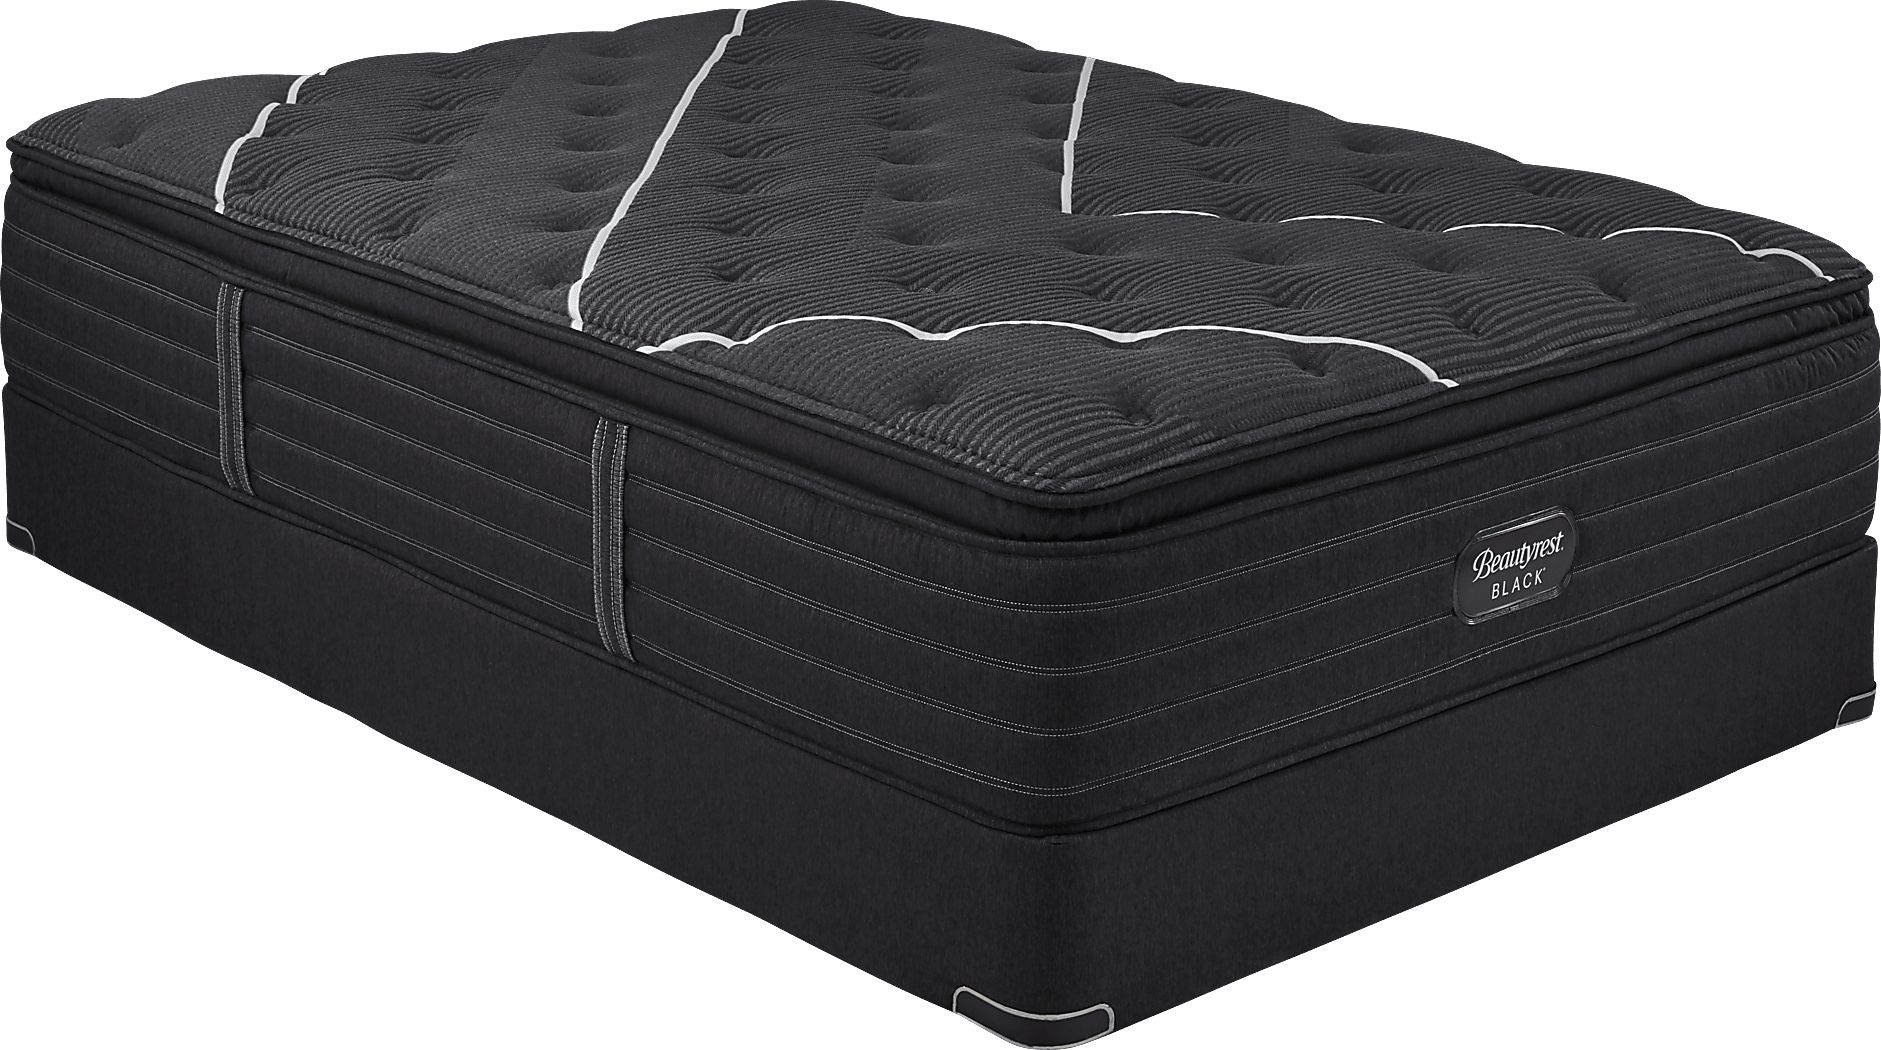 beautyrest blackice infant and toddler mattress review